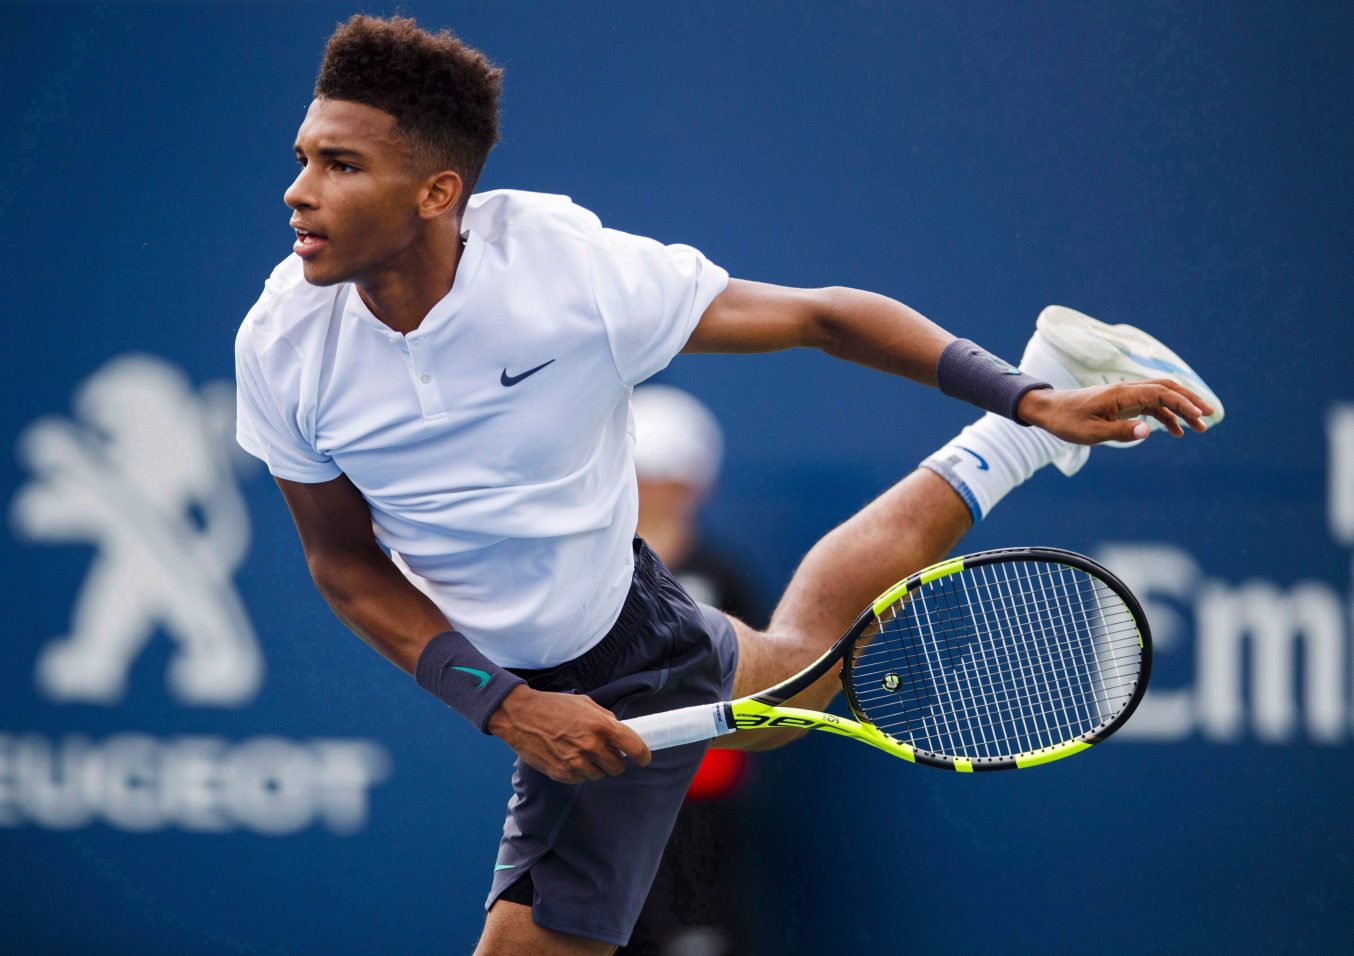 Félix Auger-Aliassime serves to his opponent